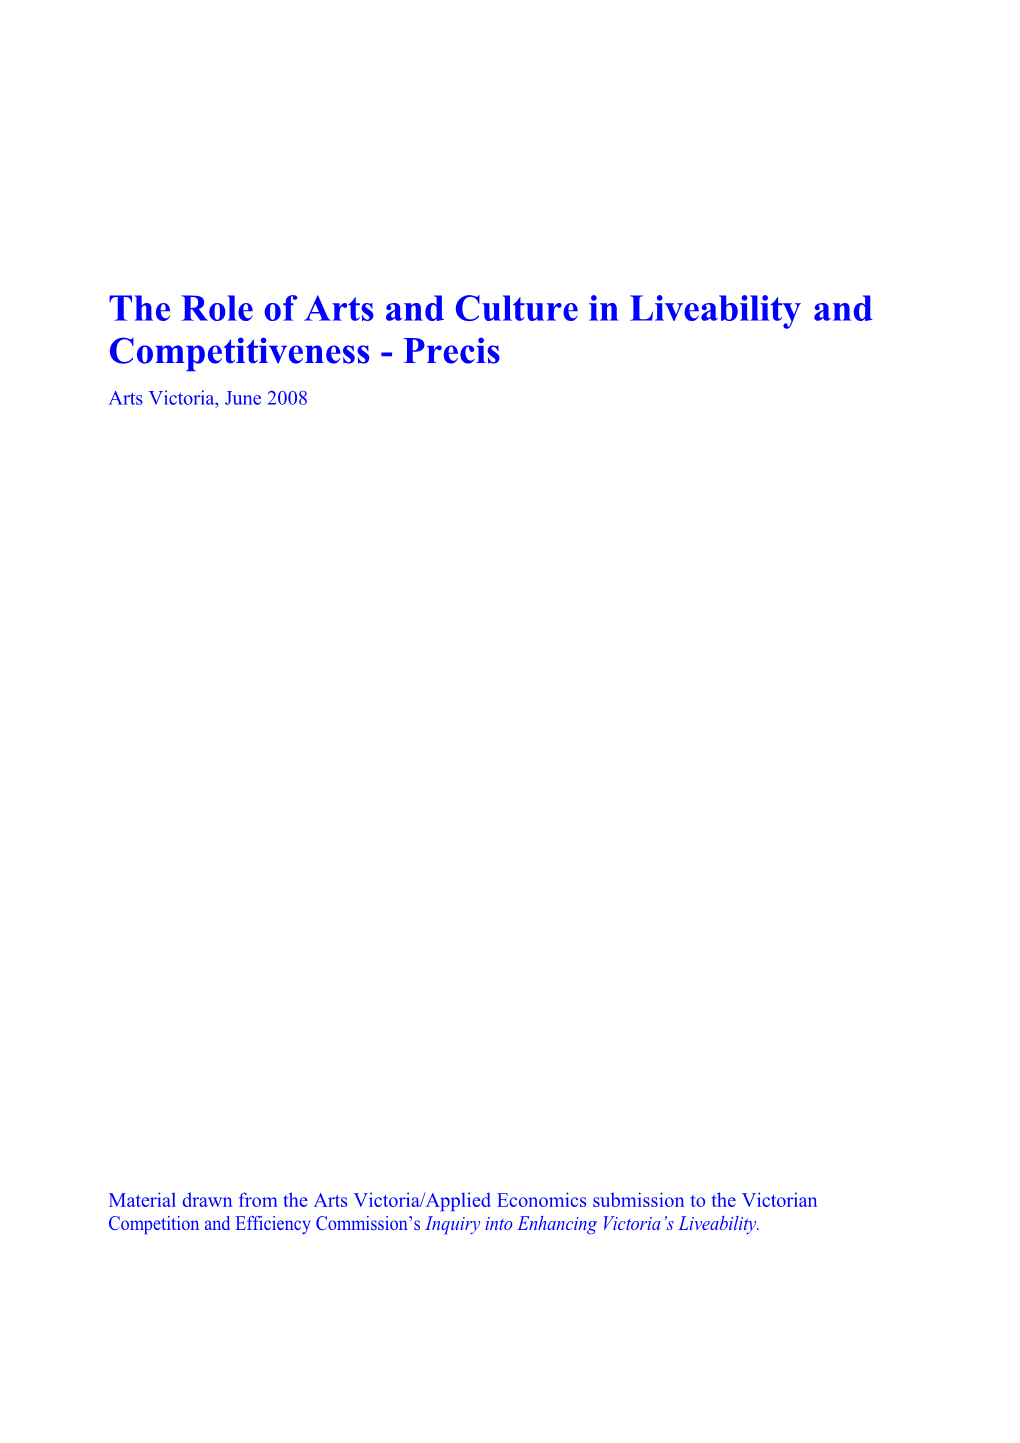 The Role of Arts and Culture in Liveability and Competitiveness